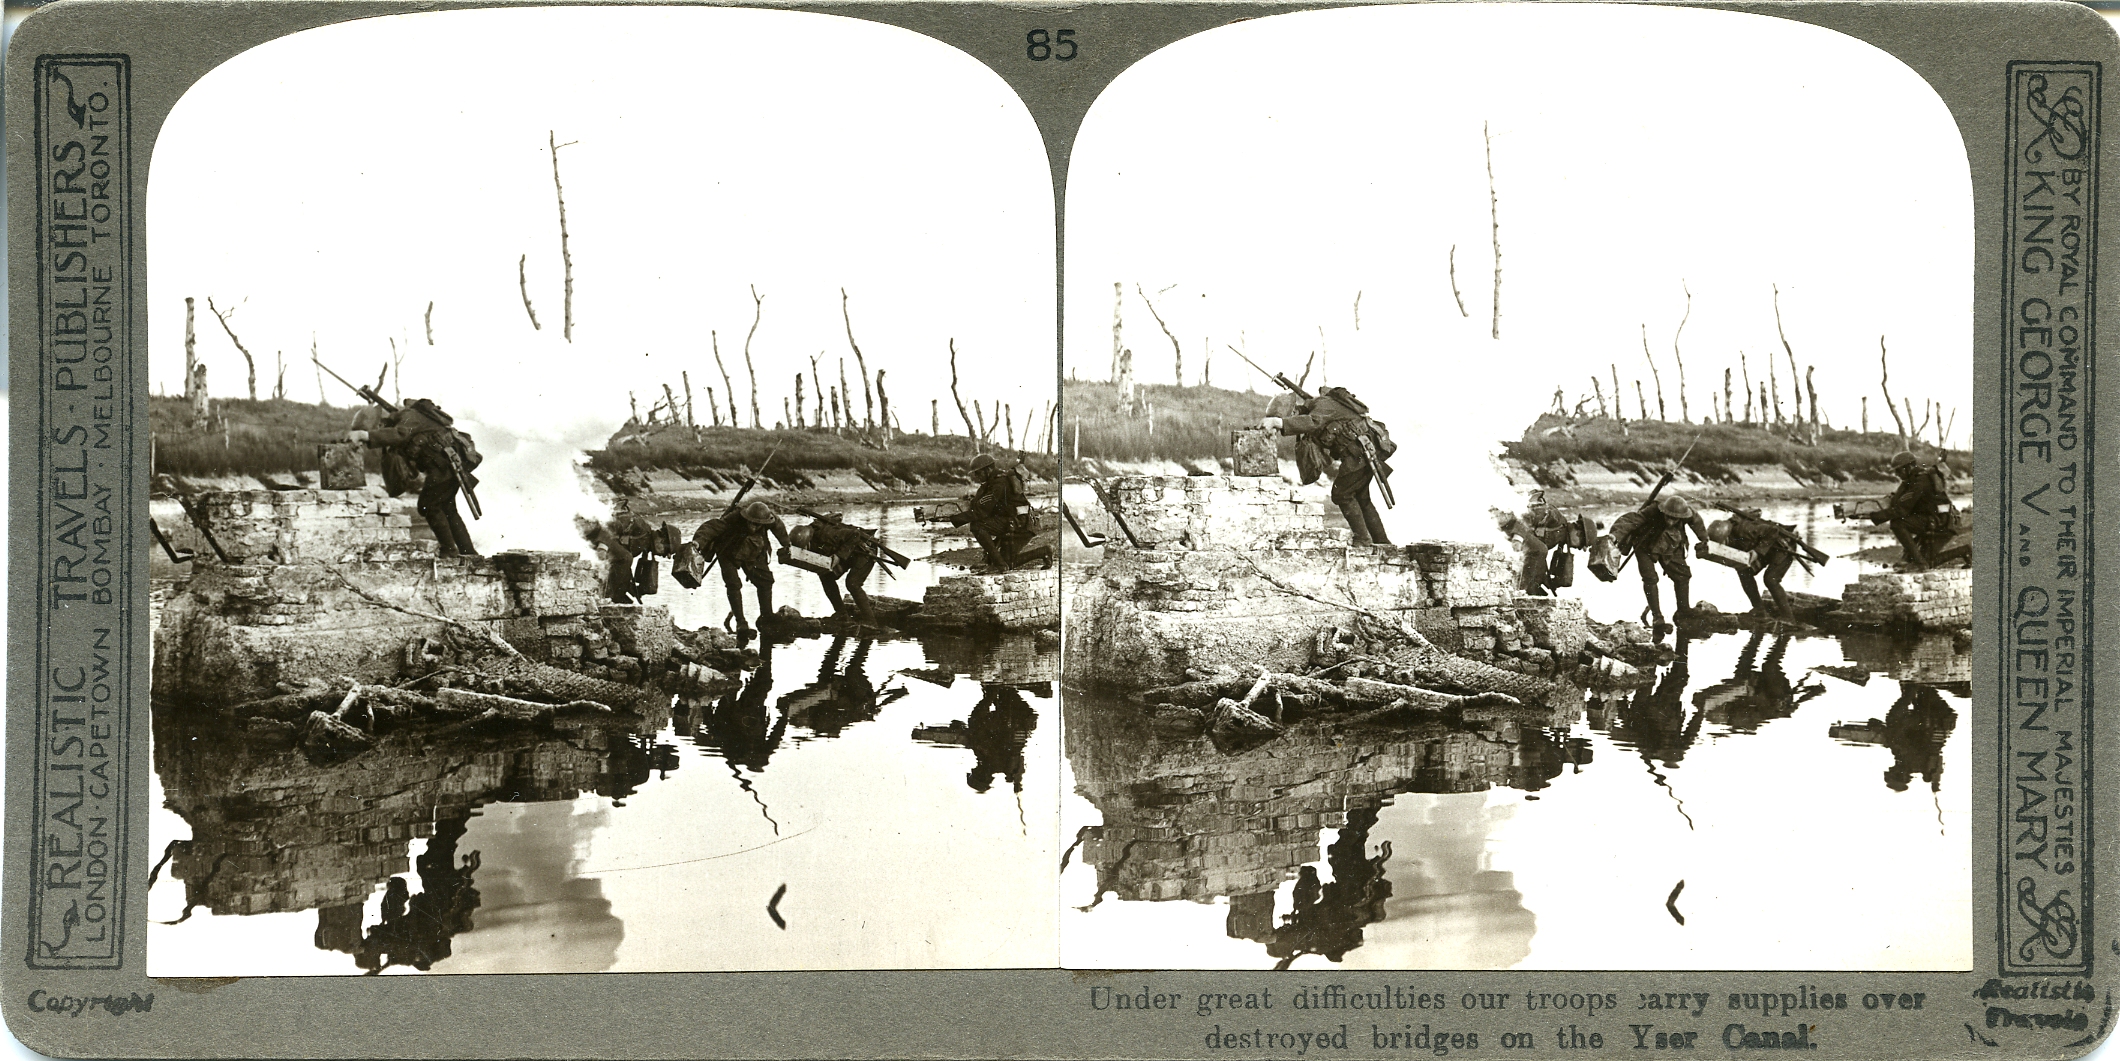 Under great difficulties, our troops carry supplies over destroyed bridges on the Yser Canal